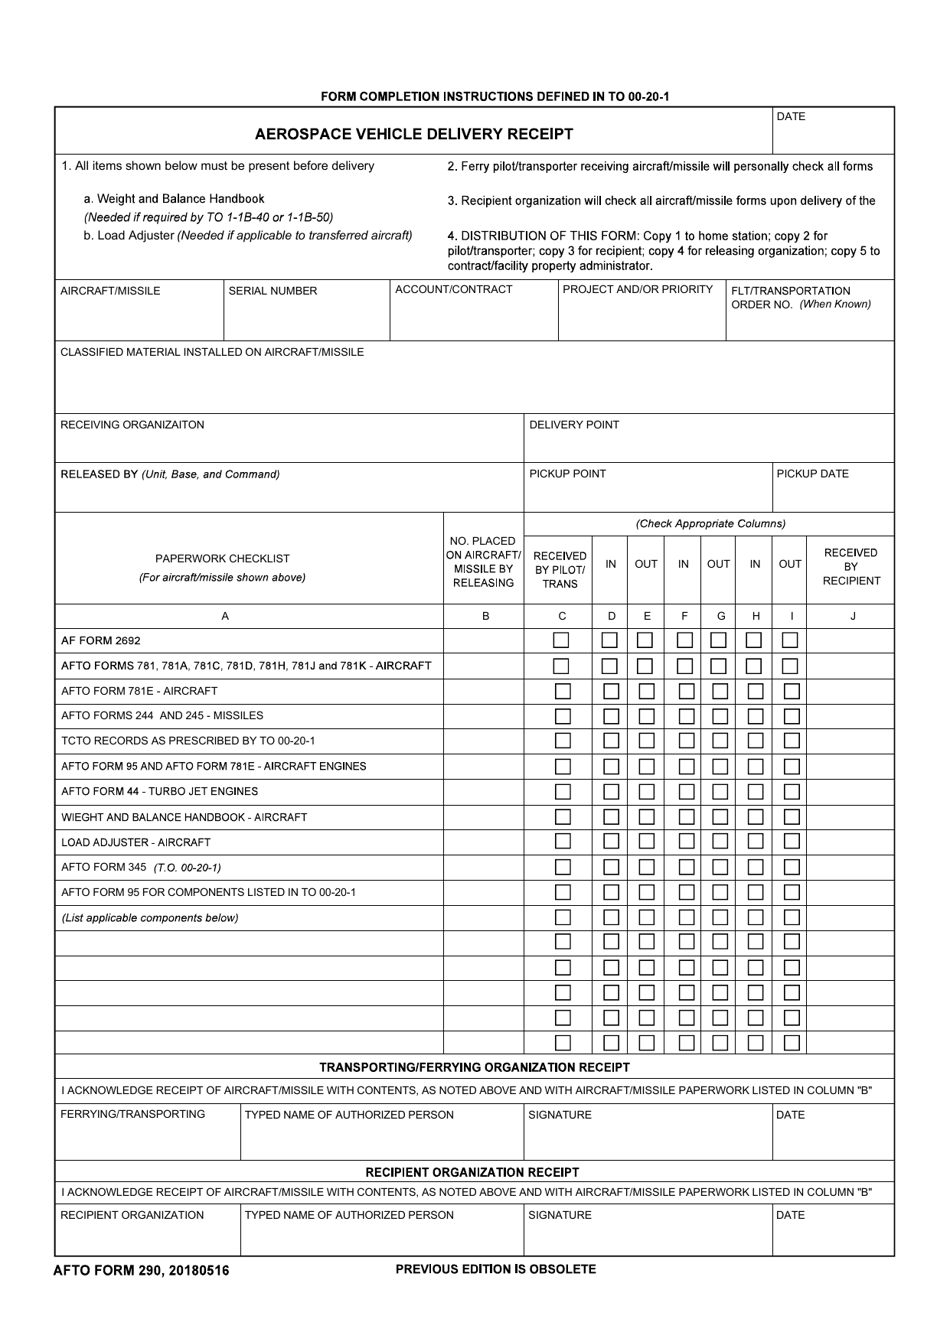 AFTO Form 290 Aerospace Vehicle Delivery Receipt, Page 1